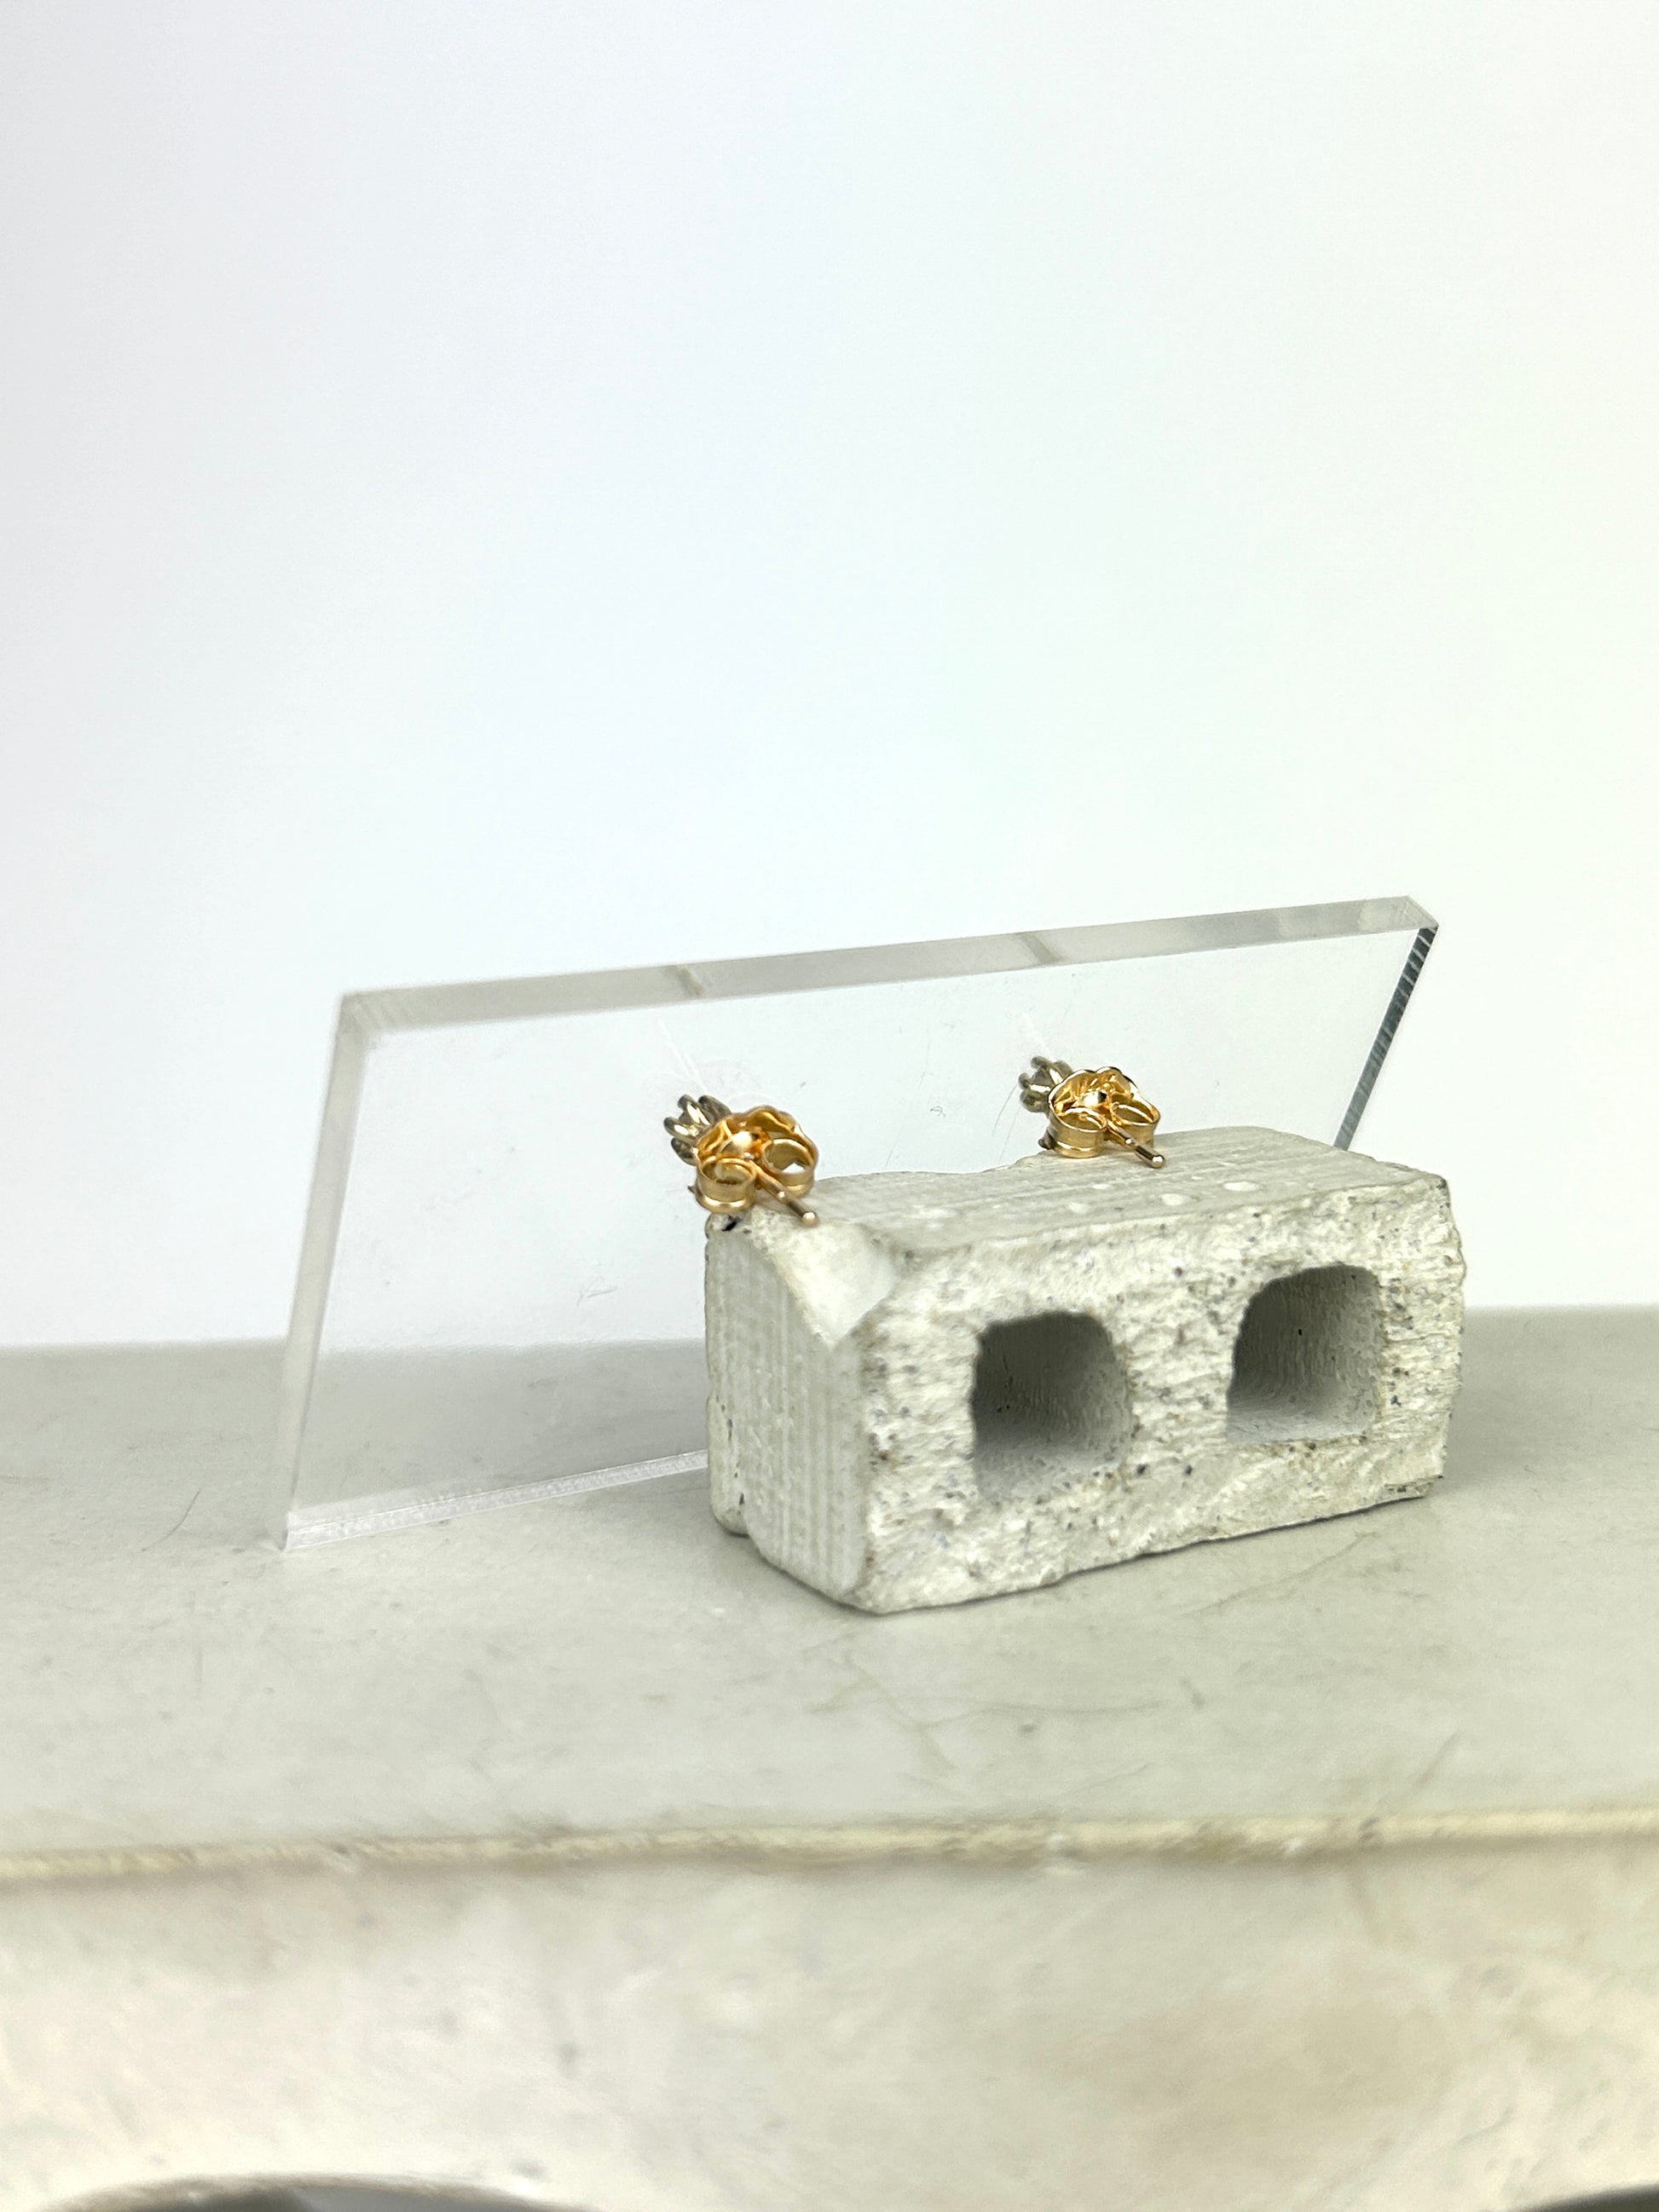 Back view 14k yellow gold stud earrings holding 2mm round cut smoky quartz displayed so you can see the earring backs on a clear acrylic card learning against a miniature cinderblock on a smooth grey surface.